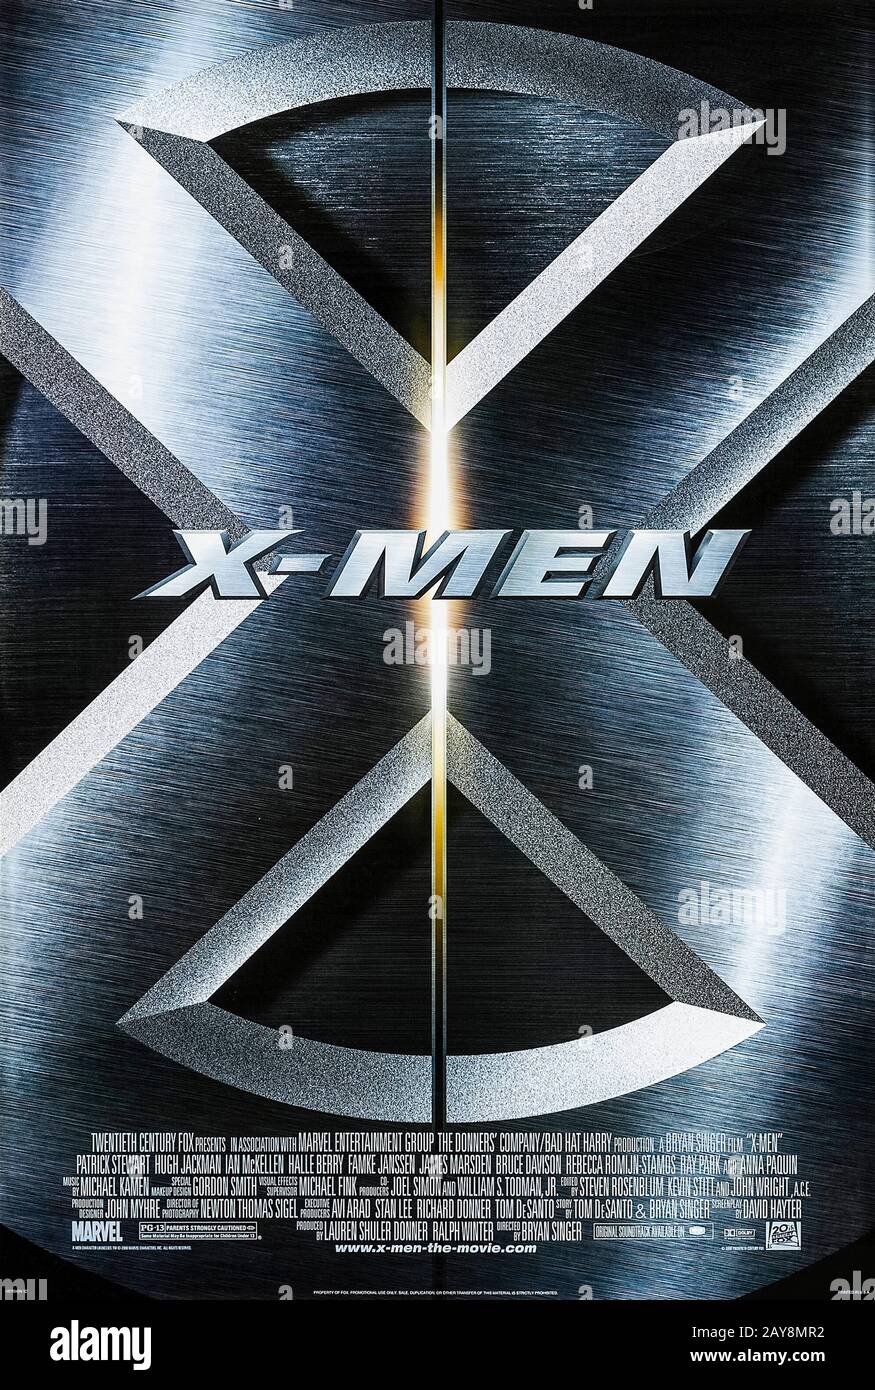 X-Men (2000) directed by Bryan Singer and starring Patrick Stewart, Hugh Jackman, Ian McKellen and Halle Berry. Professor Charles Xavier and his X-men fight to stop Magneto using his mutating machine on mankind. Stock Photo